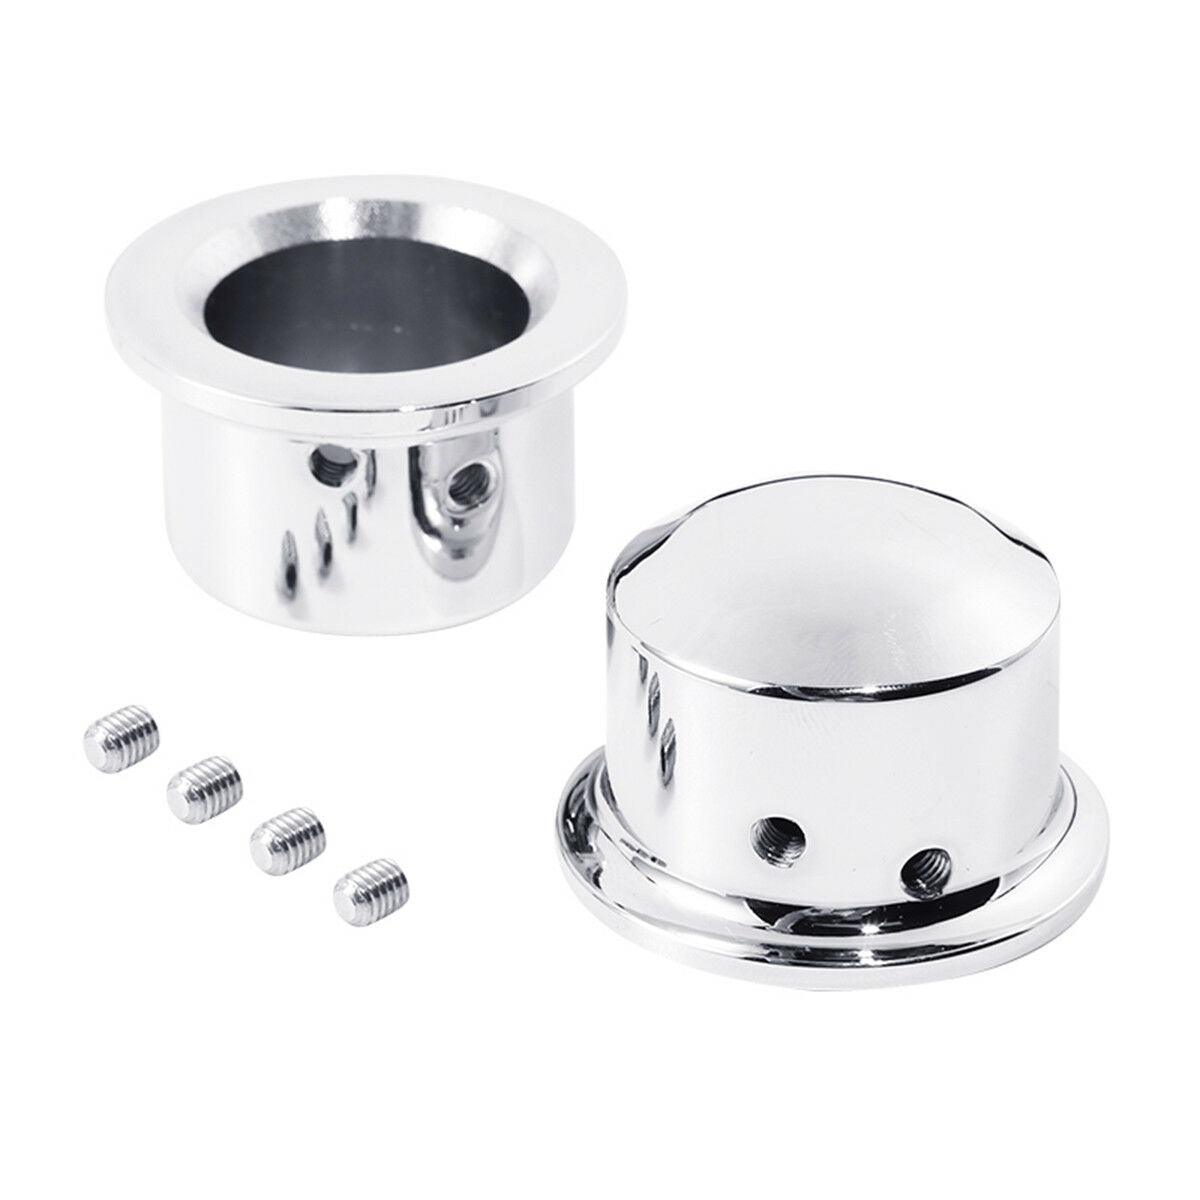 CNC Chrome Front Axle Nut Covers Bolt Set Fit For Harley Dyna Street Bob 08-17 - Moto Life Products